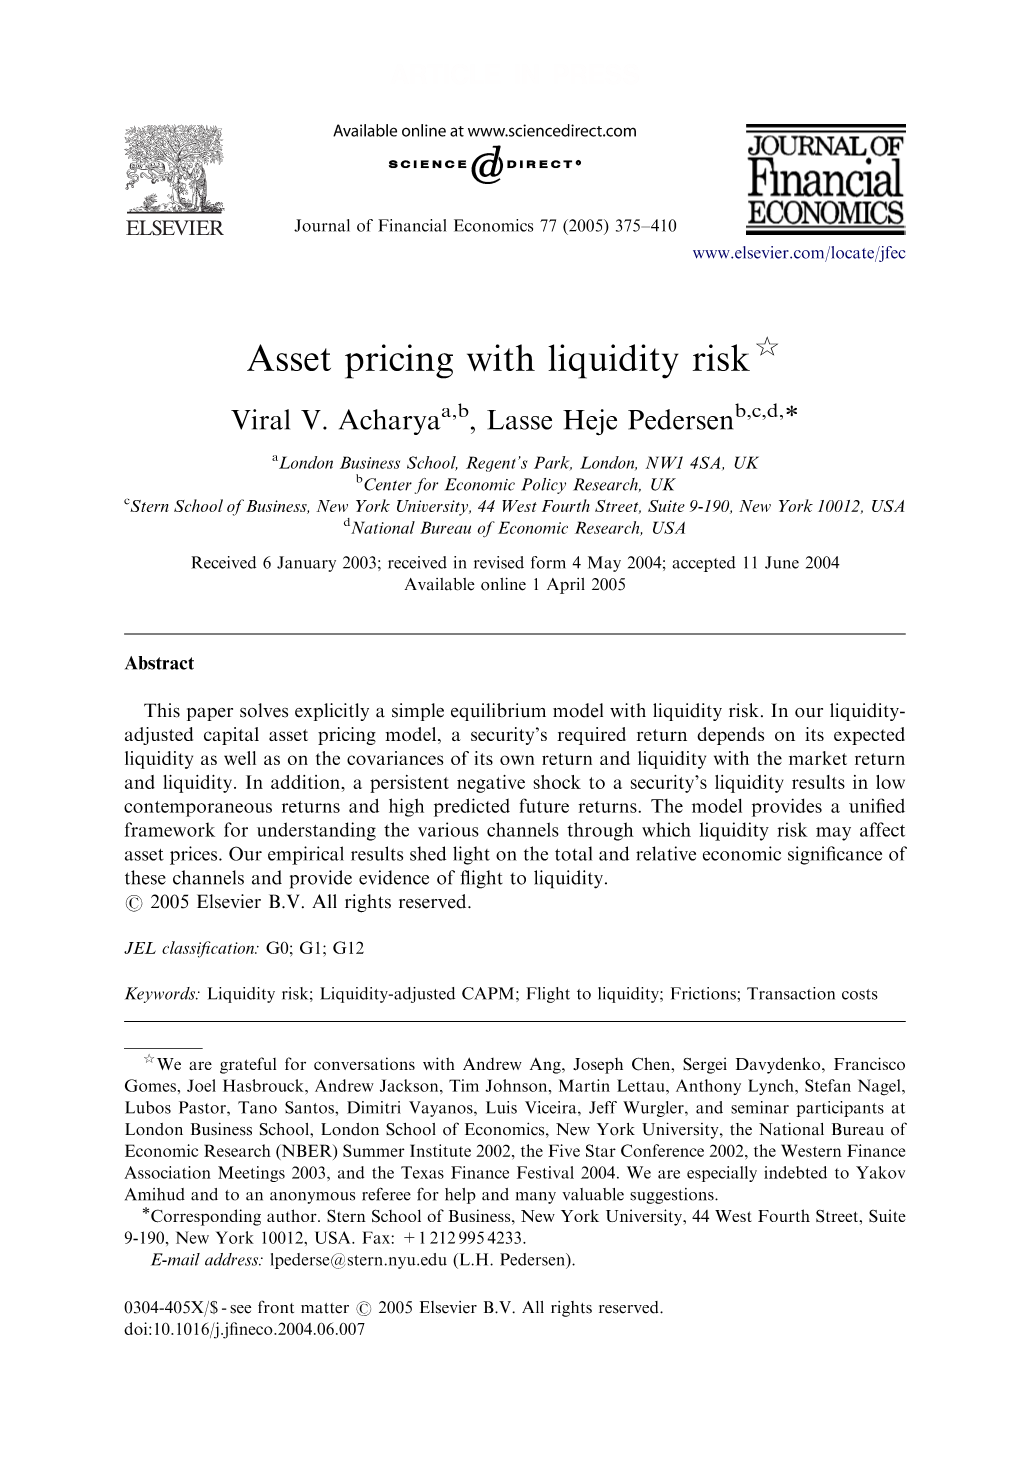 Asset Pricing with Liquidity Risk$